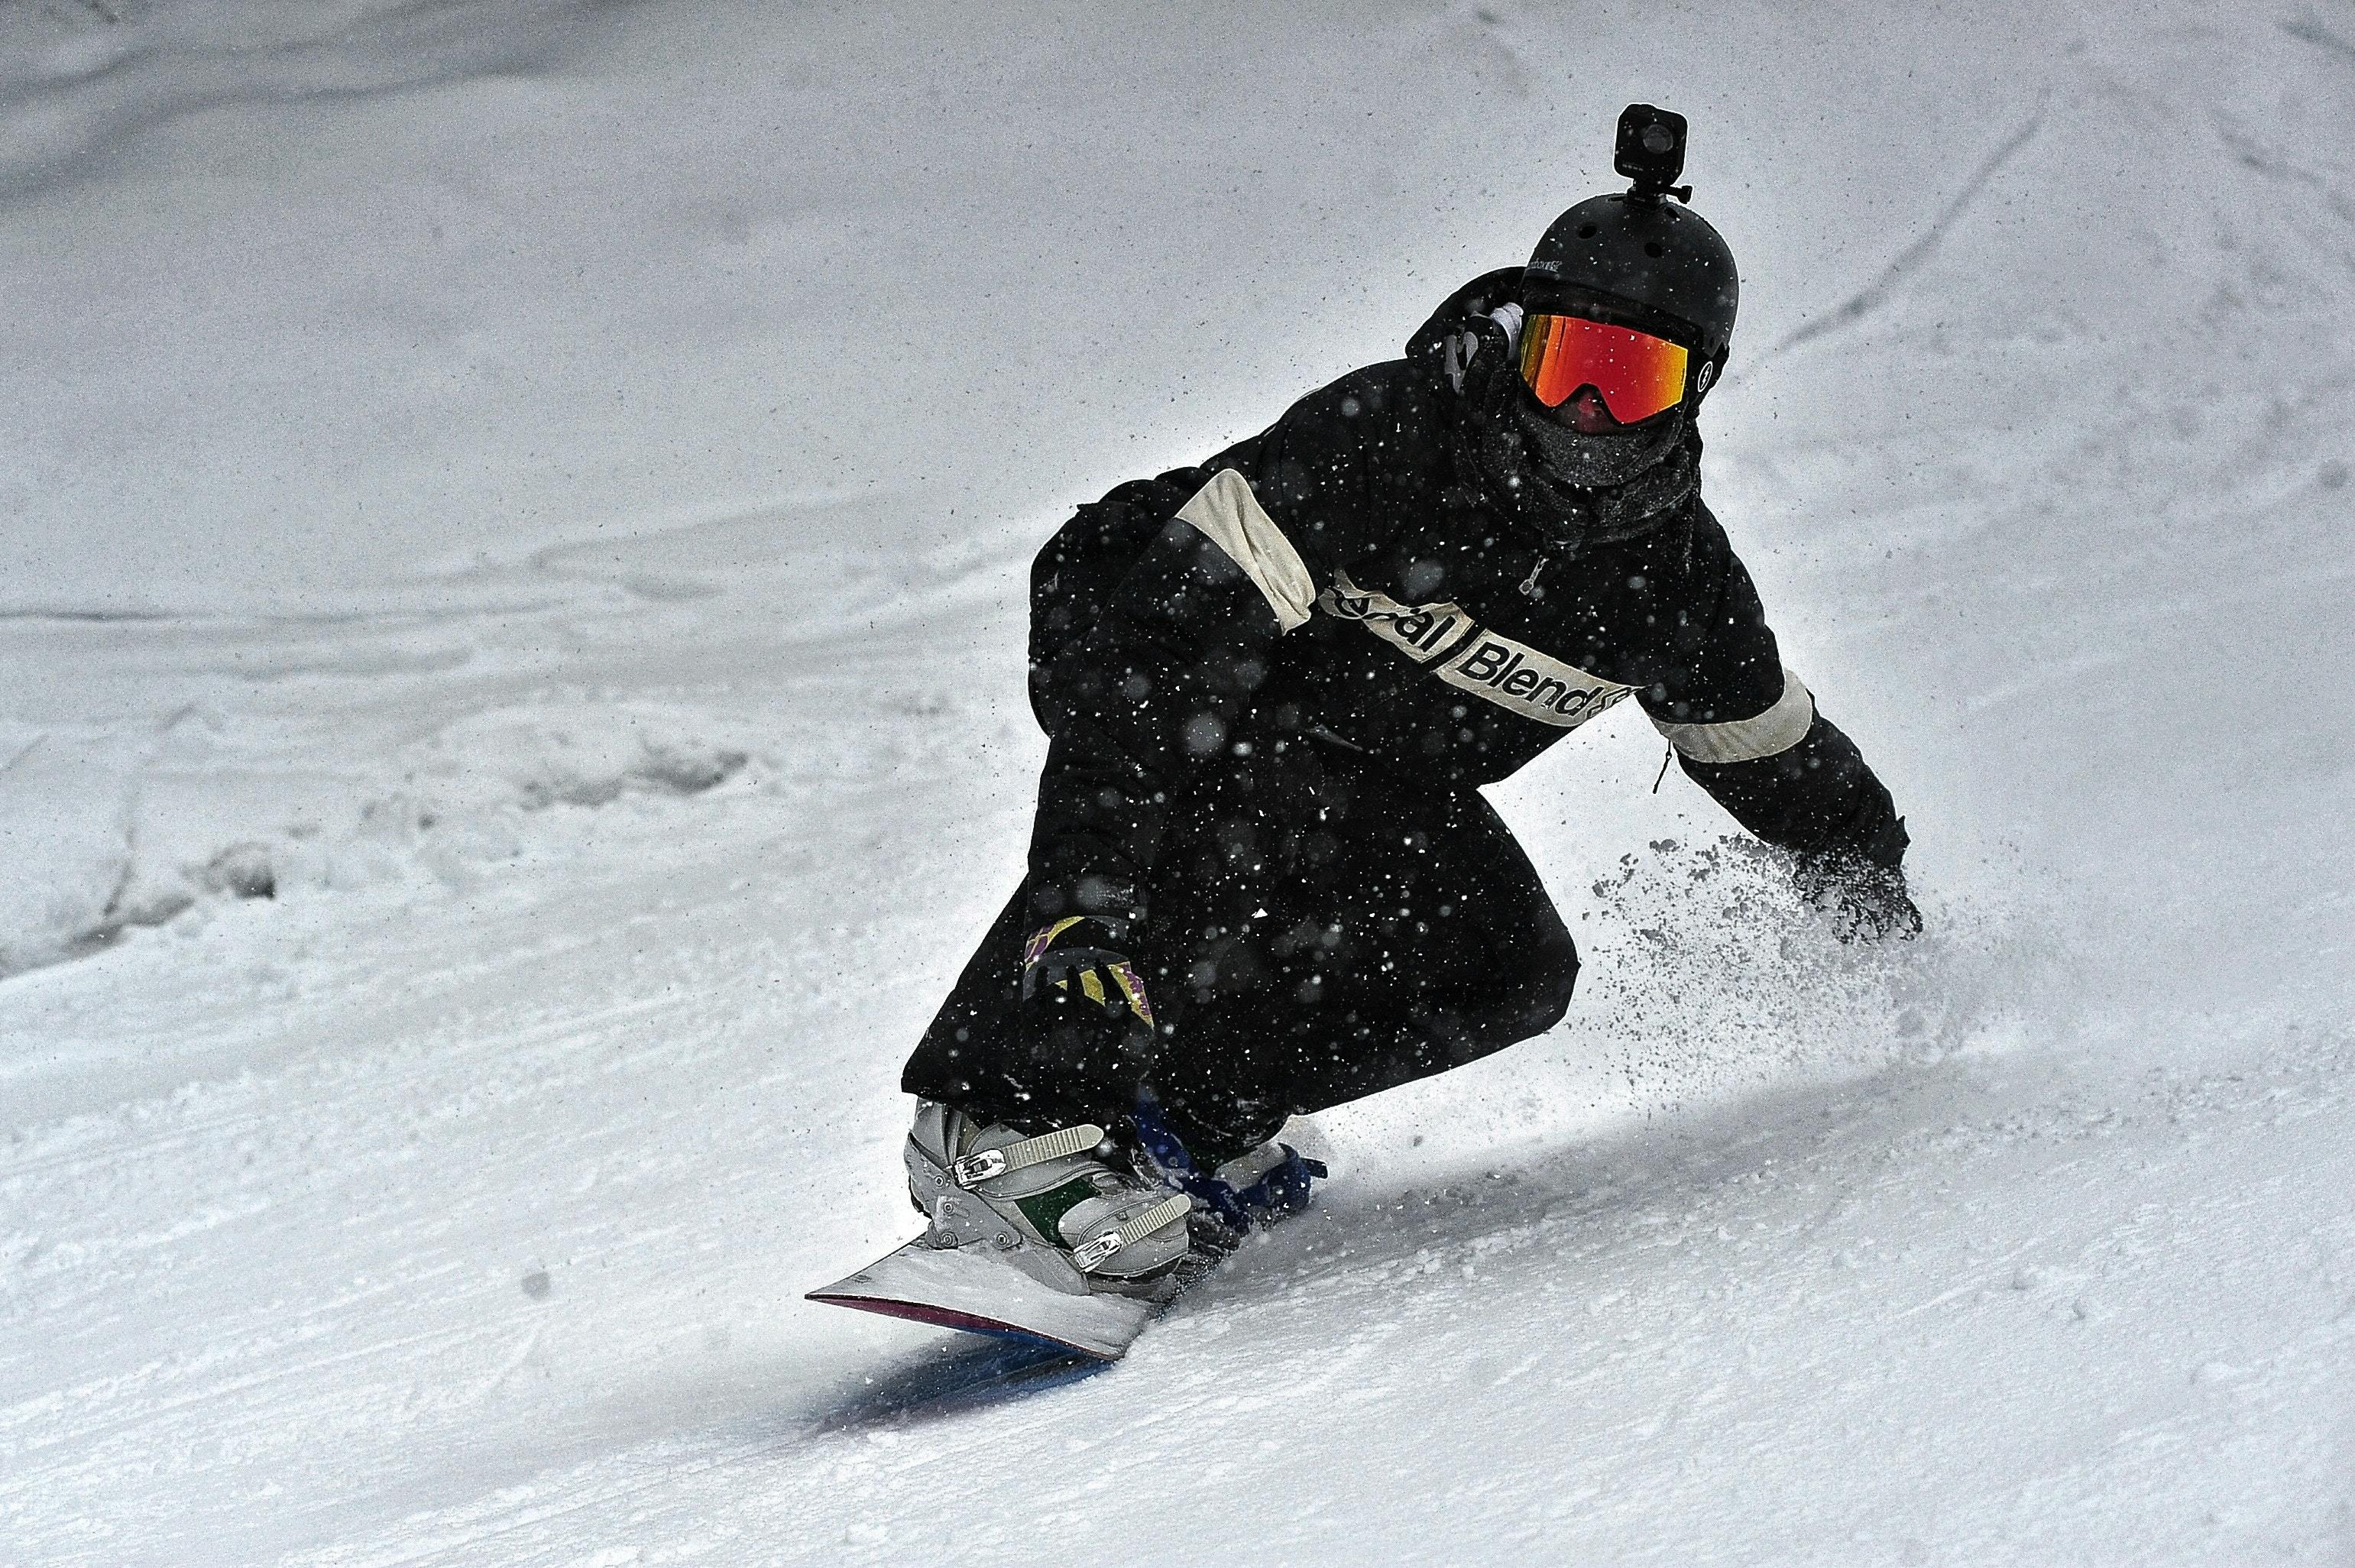 Snowboarder wearing a Go Pro on his helmet shreds down the mountain. 